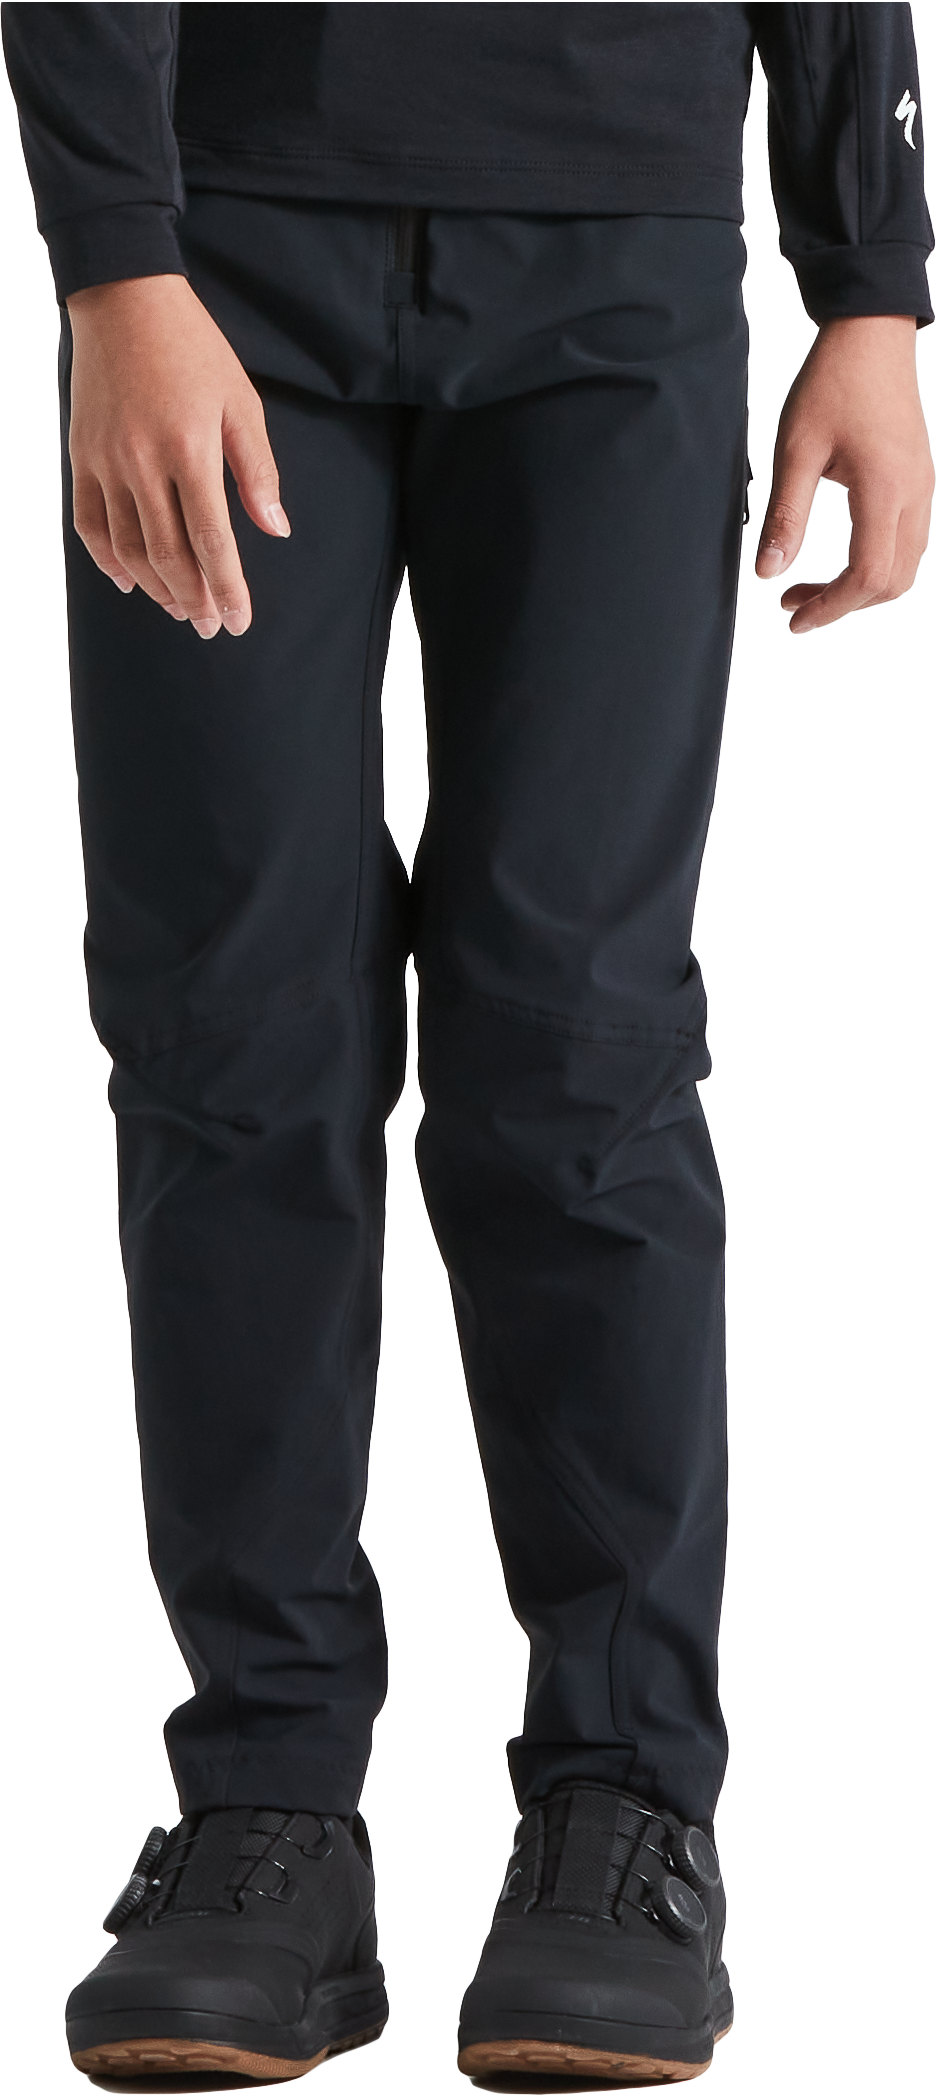 Specialized Youth Trail Pant